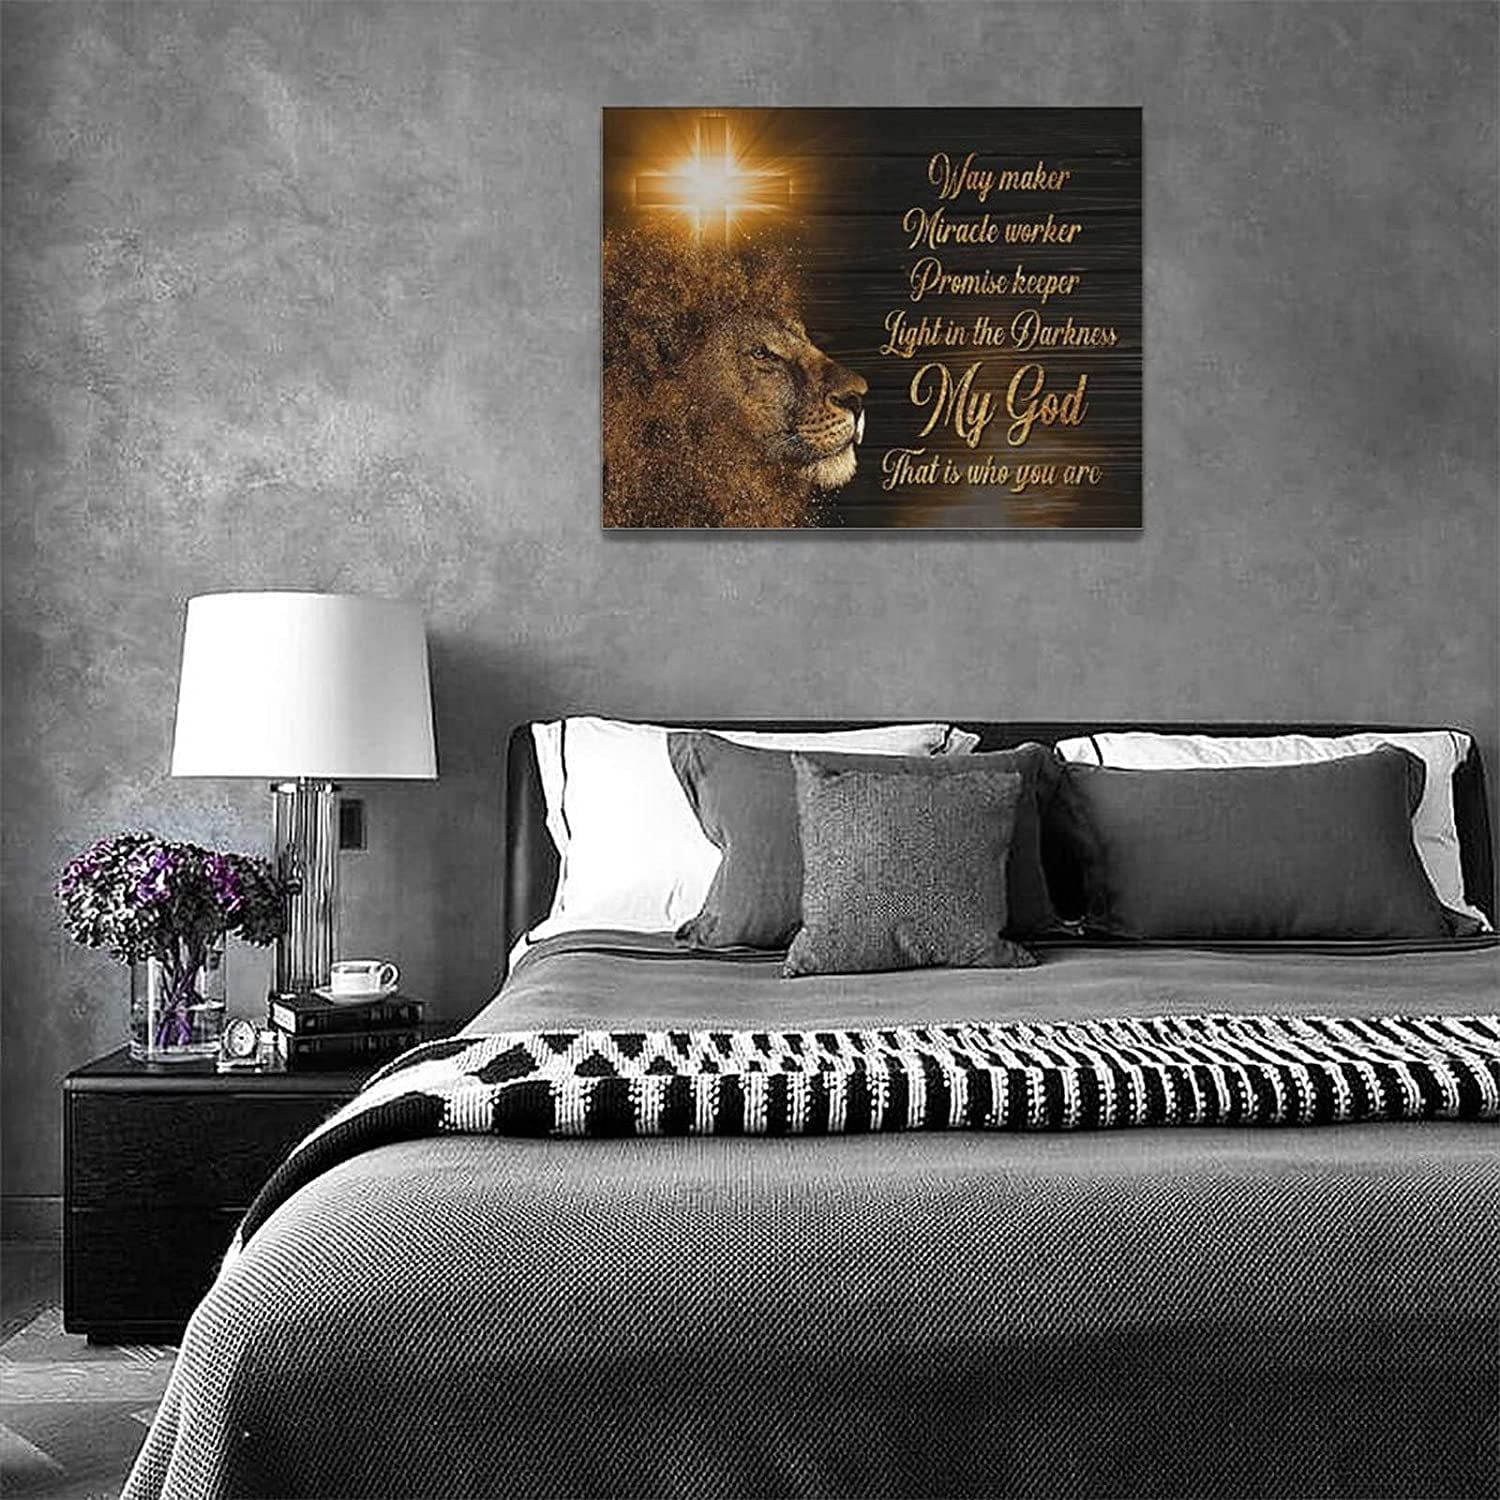 Lion of Judah Wall Art Shiny Lion Christian Religious Painting Canvas Wall  Decor Lion Quotes Painting Print Way Maker Artworks Modern Home Framed for  Living Room Bedroom Bathroom 12